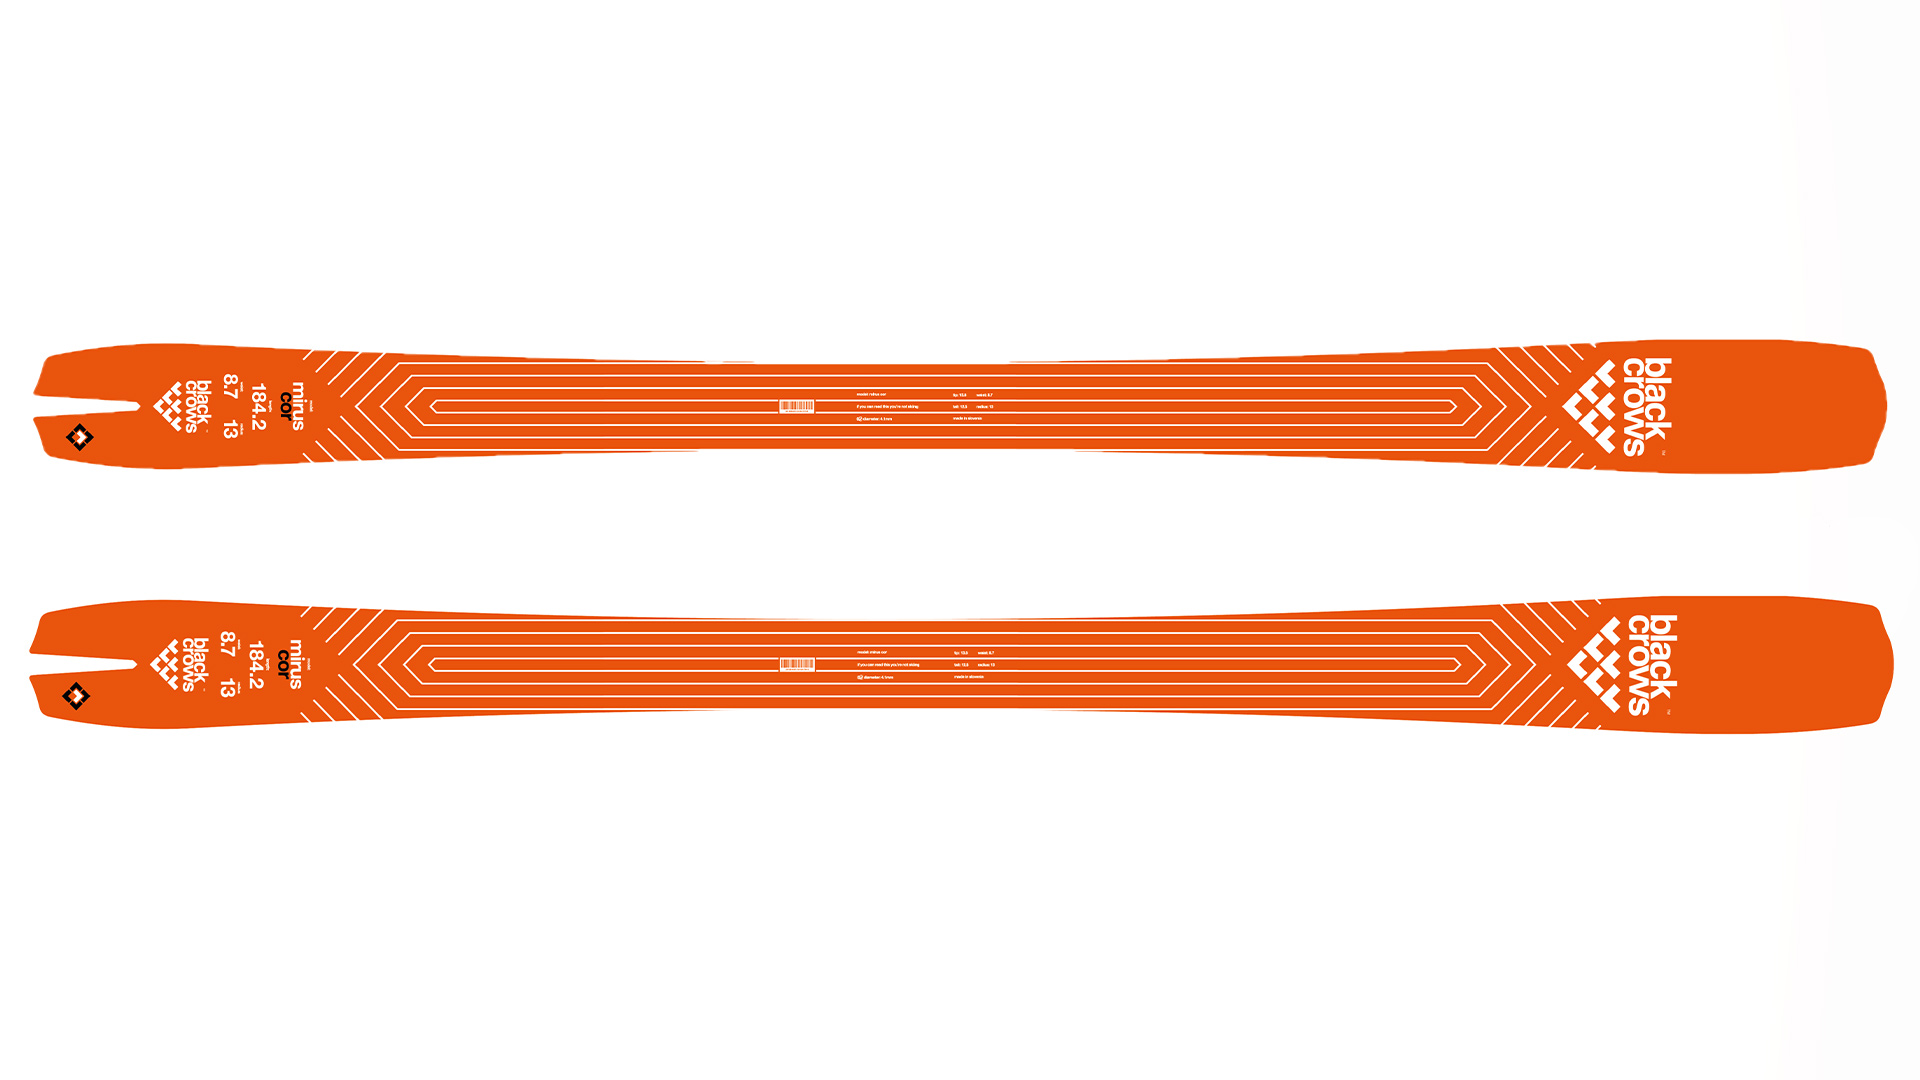 New Black Crows Skis For Winter 21/22 | Ski Gear Preview